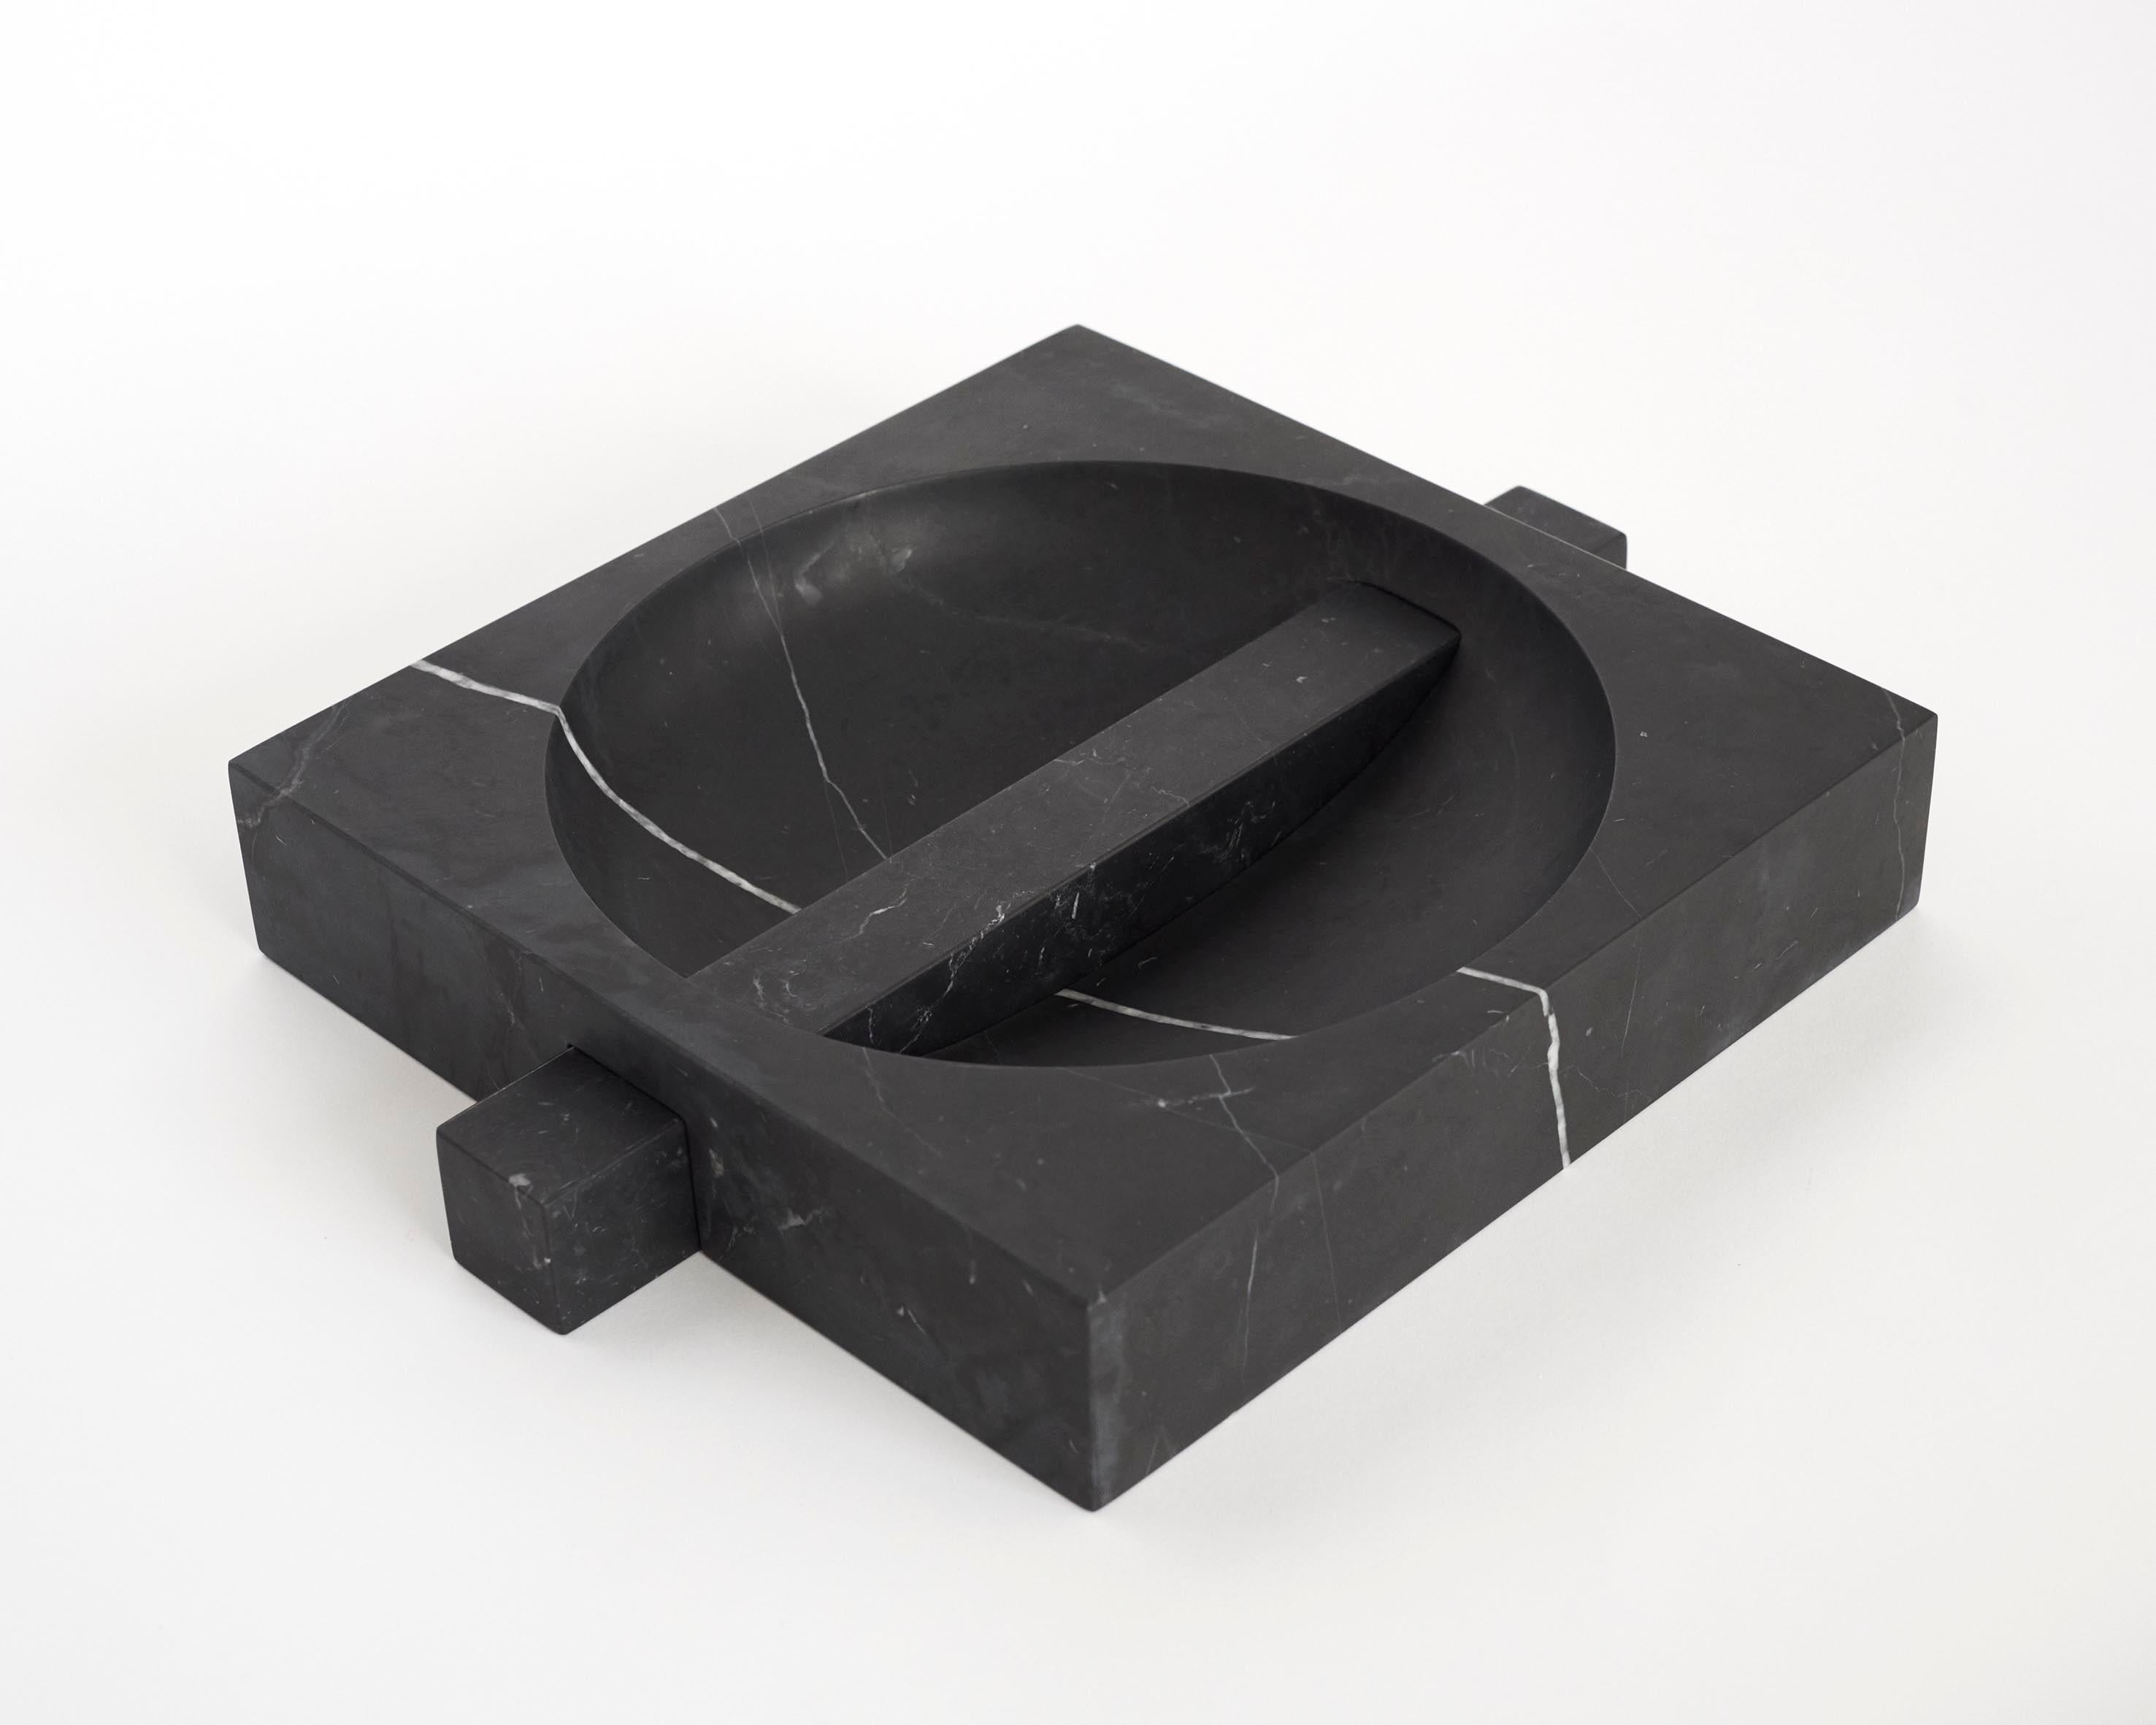 Minimalist Contemporary Marble Bowl, Black Kinitra Marble, Handmade in Italy For Sale